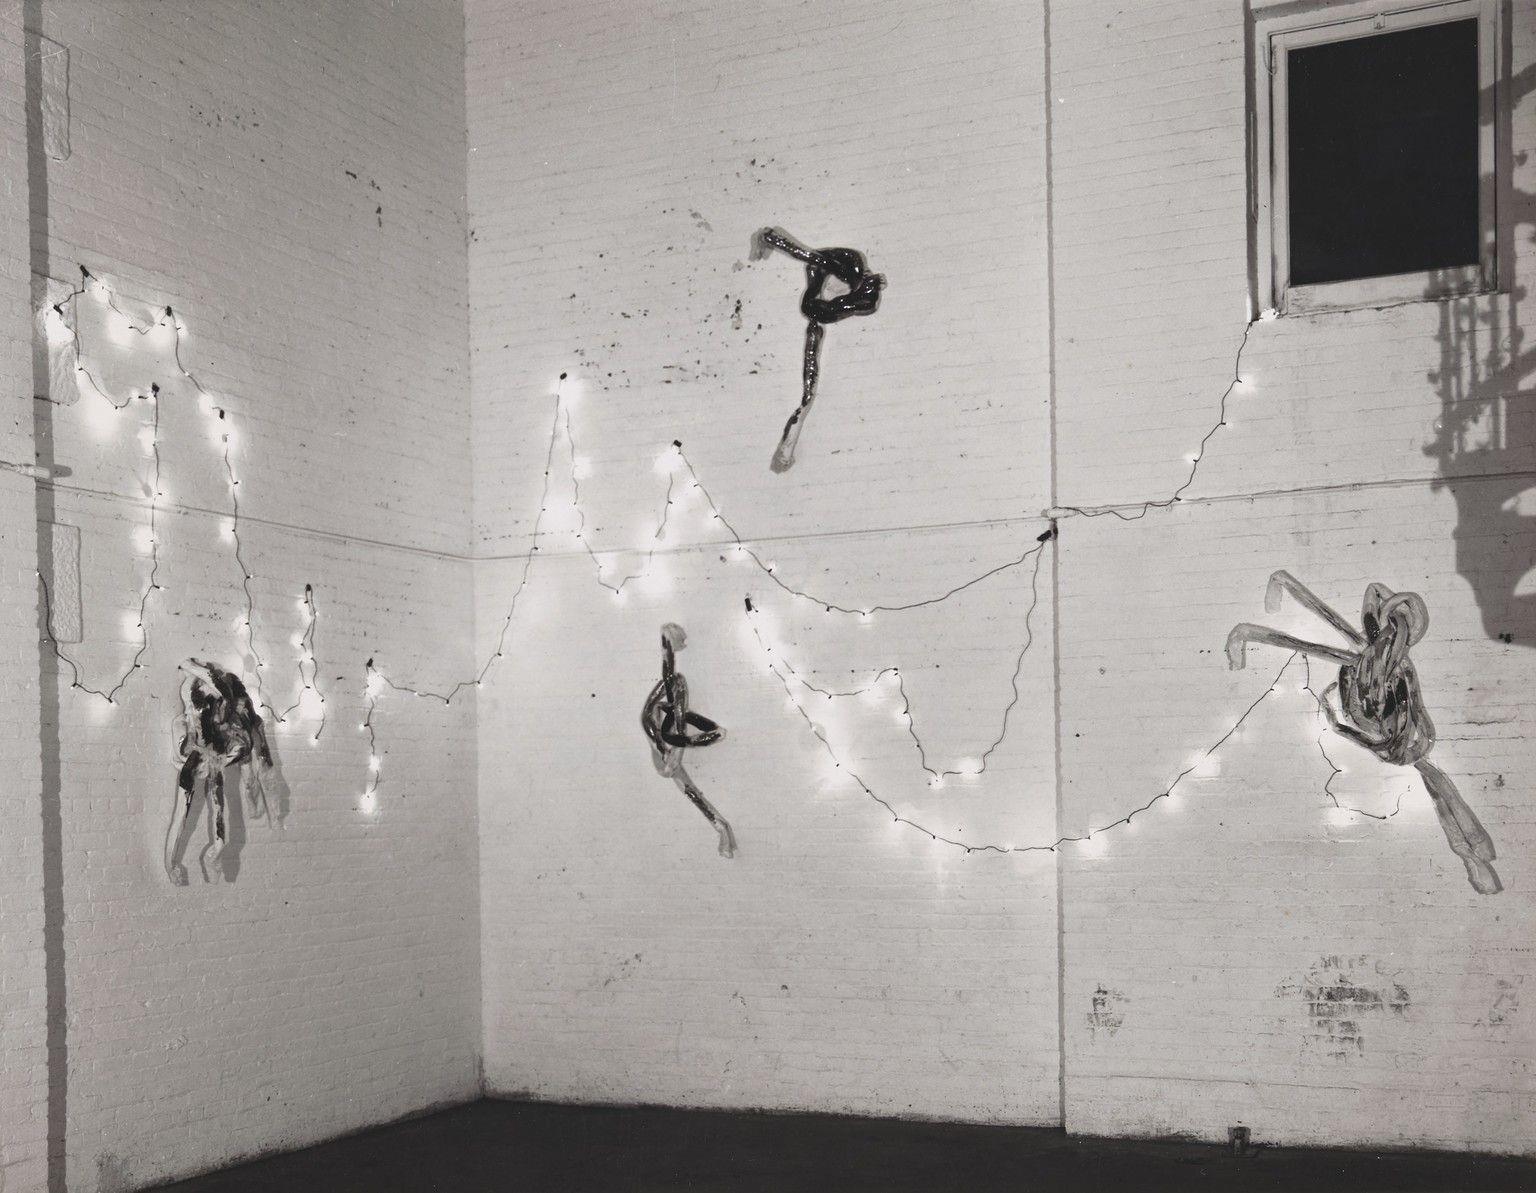 A black-and-white photo of a whitewashed brick interior with four “glitter knot” sculptures, hanging on the walls along with strands of small lights strung on the walls in a looping fashion.